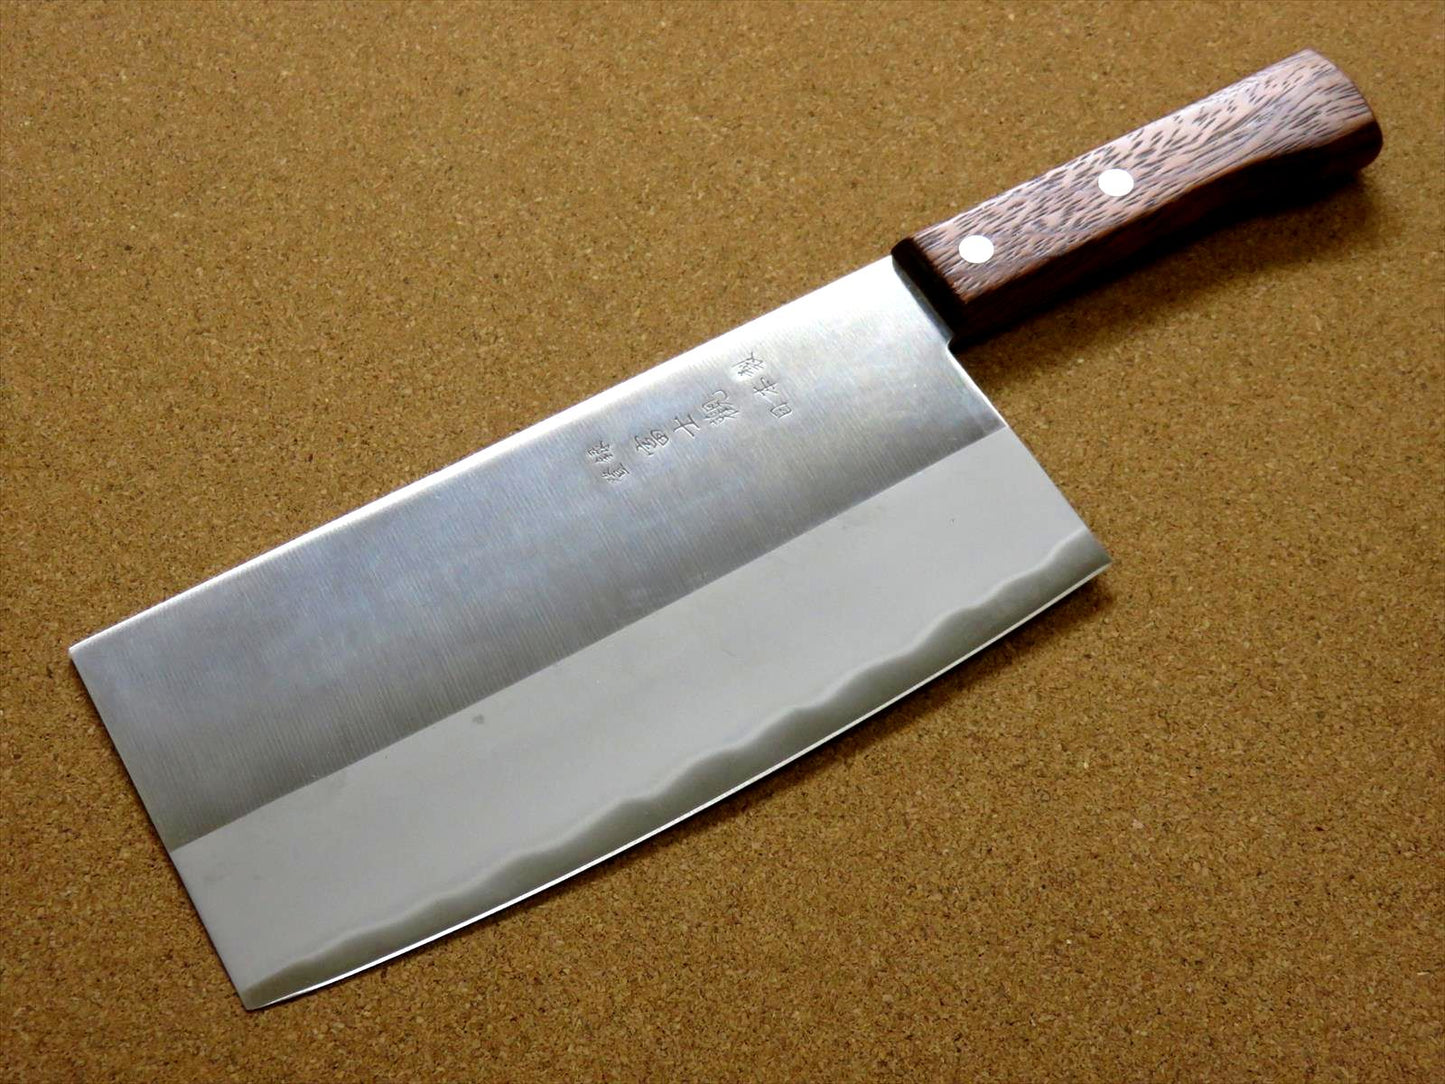 Japanese FUJIMI Kitchen Chinese Chef's Knife 175mm 7 inch Stainless SEKI JAPAN